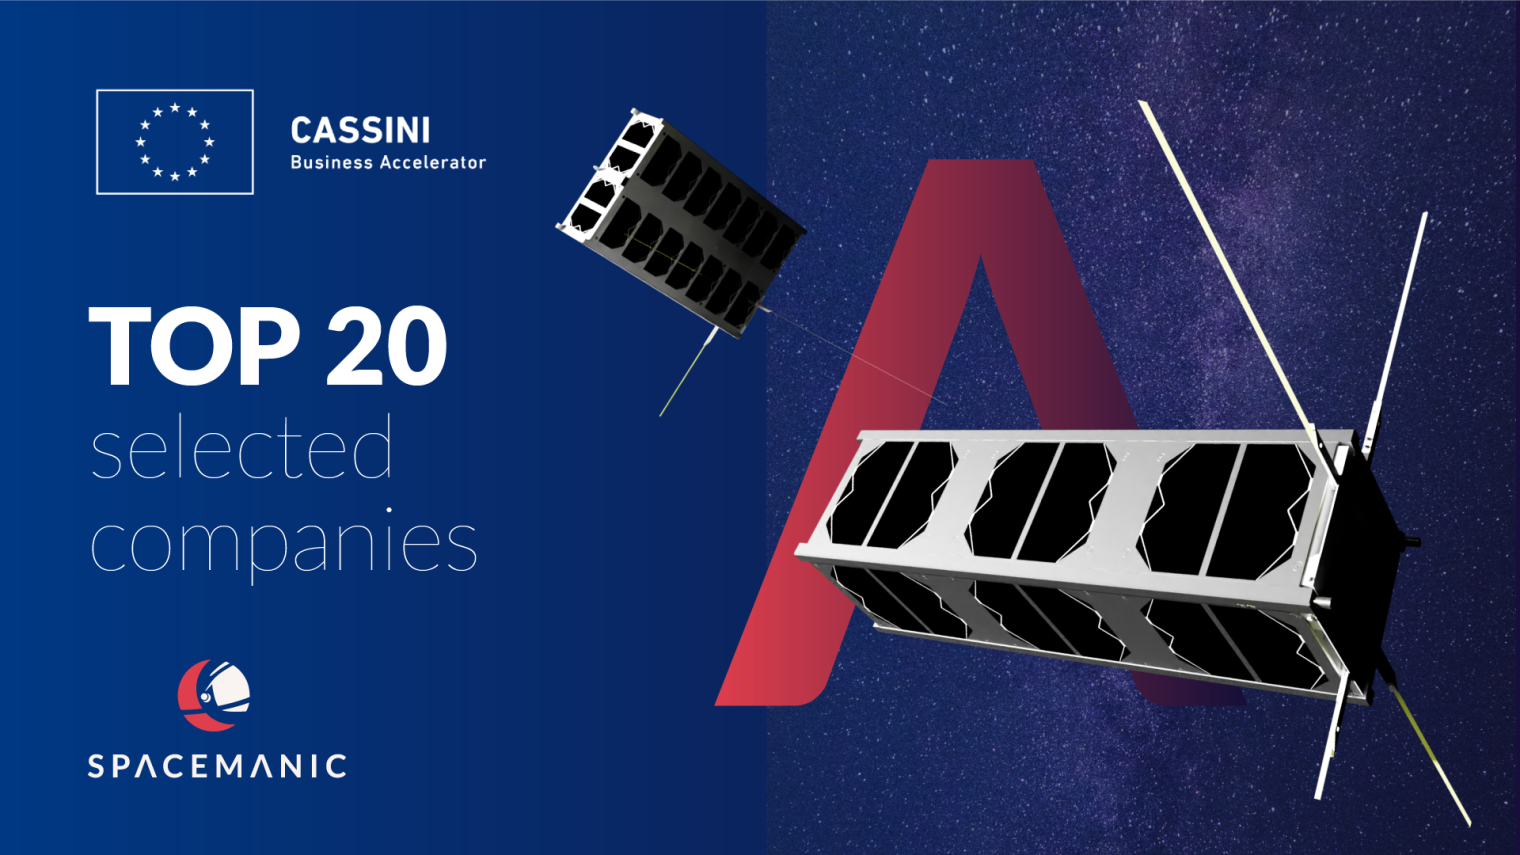 Spacemanic Soars to New Heights as a Cassini Business Accelerator Top 20 Pick!